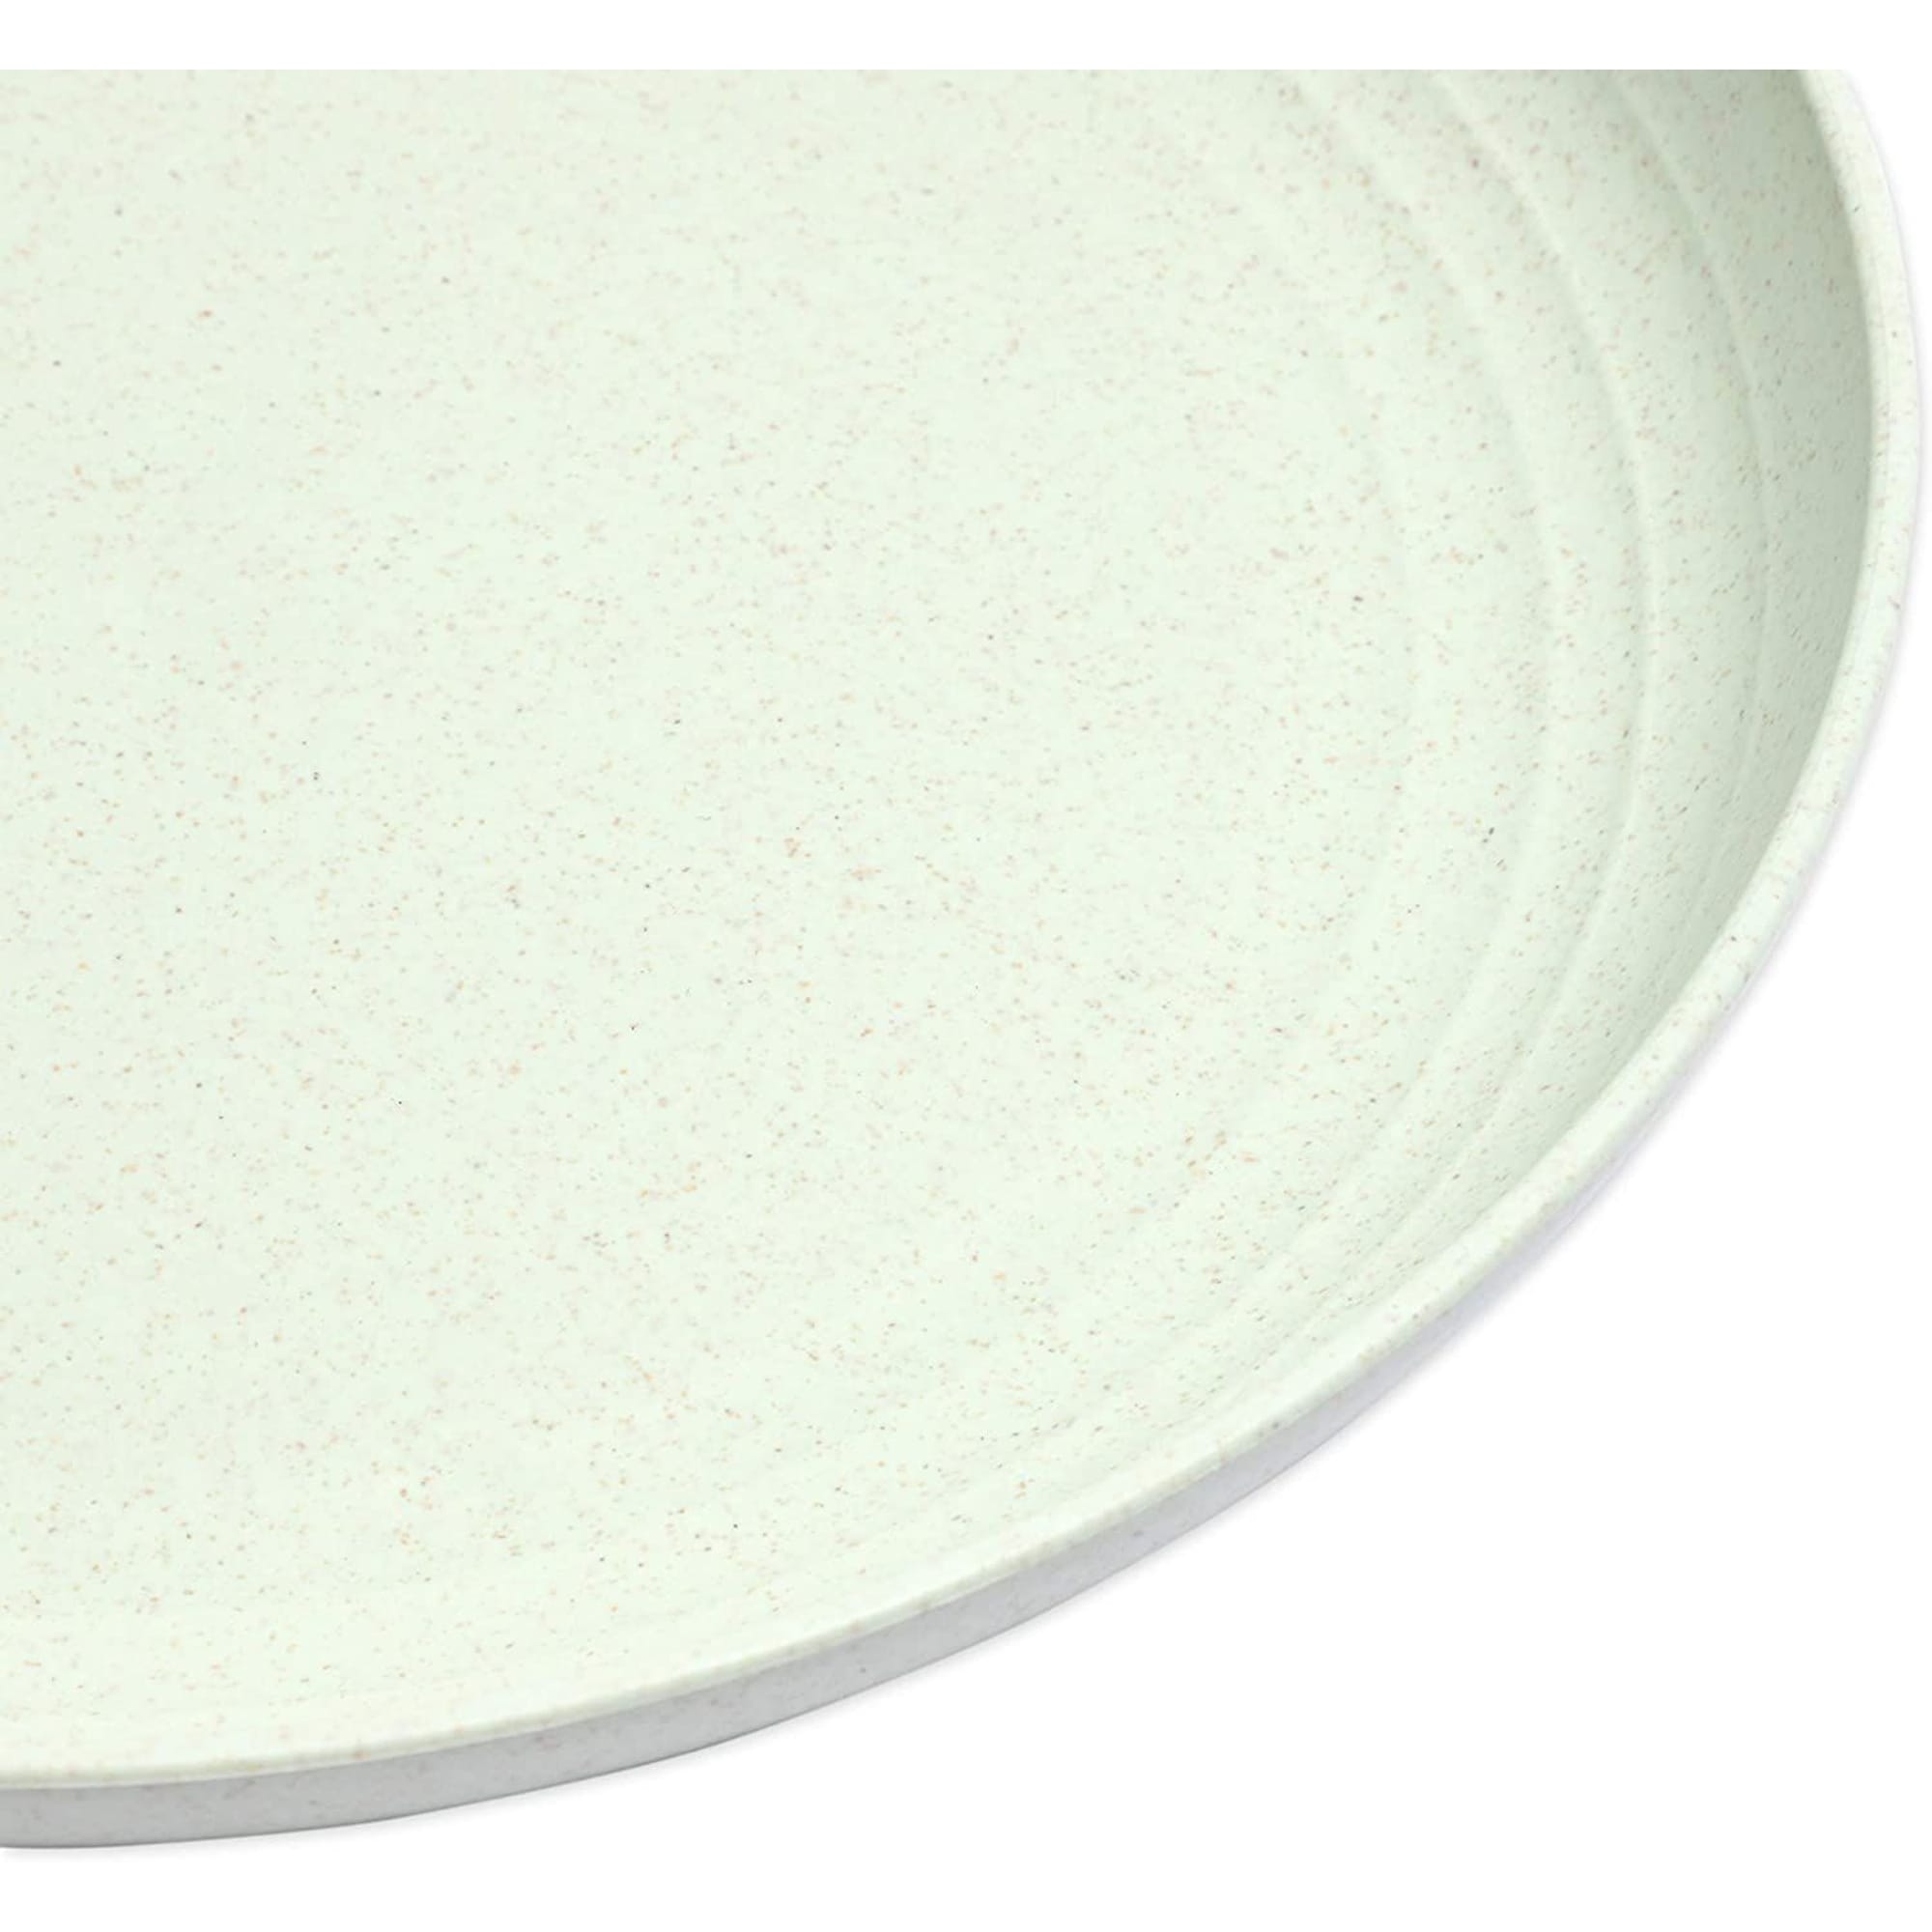 https://ak1.ostkcdn.com/images/products/is/images/direct/a9e1685e95d05fc4eb49ba8671b2636a9d4c026c/Wheat-Straw-Plates%2C-Unbreakable-Plate-%28Green%2C-9-in%2C-6-Pack%29.jpg